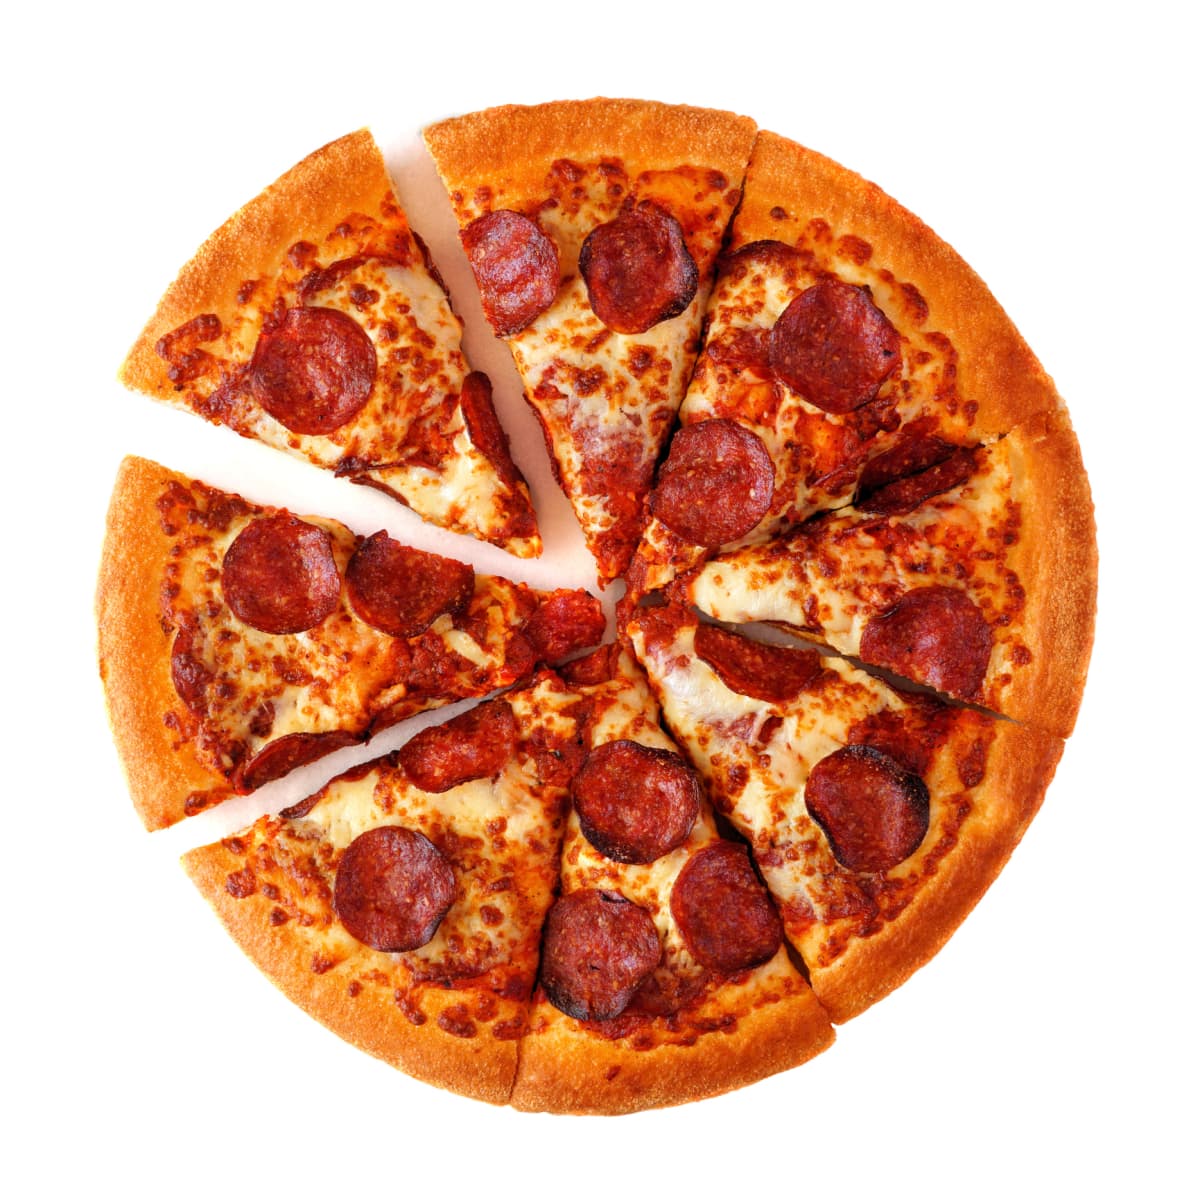 A pepperoni pizza pie cut into slices